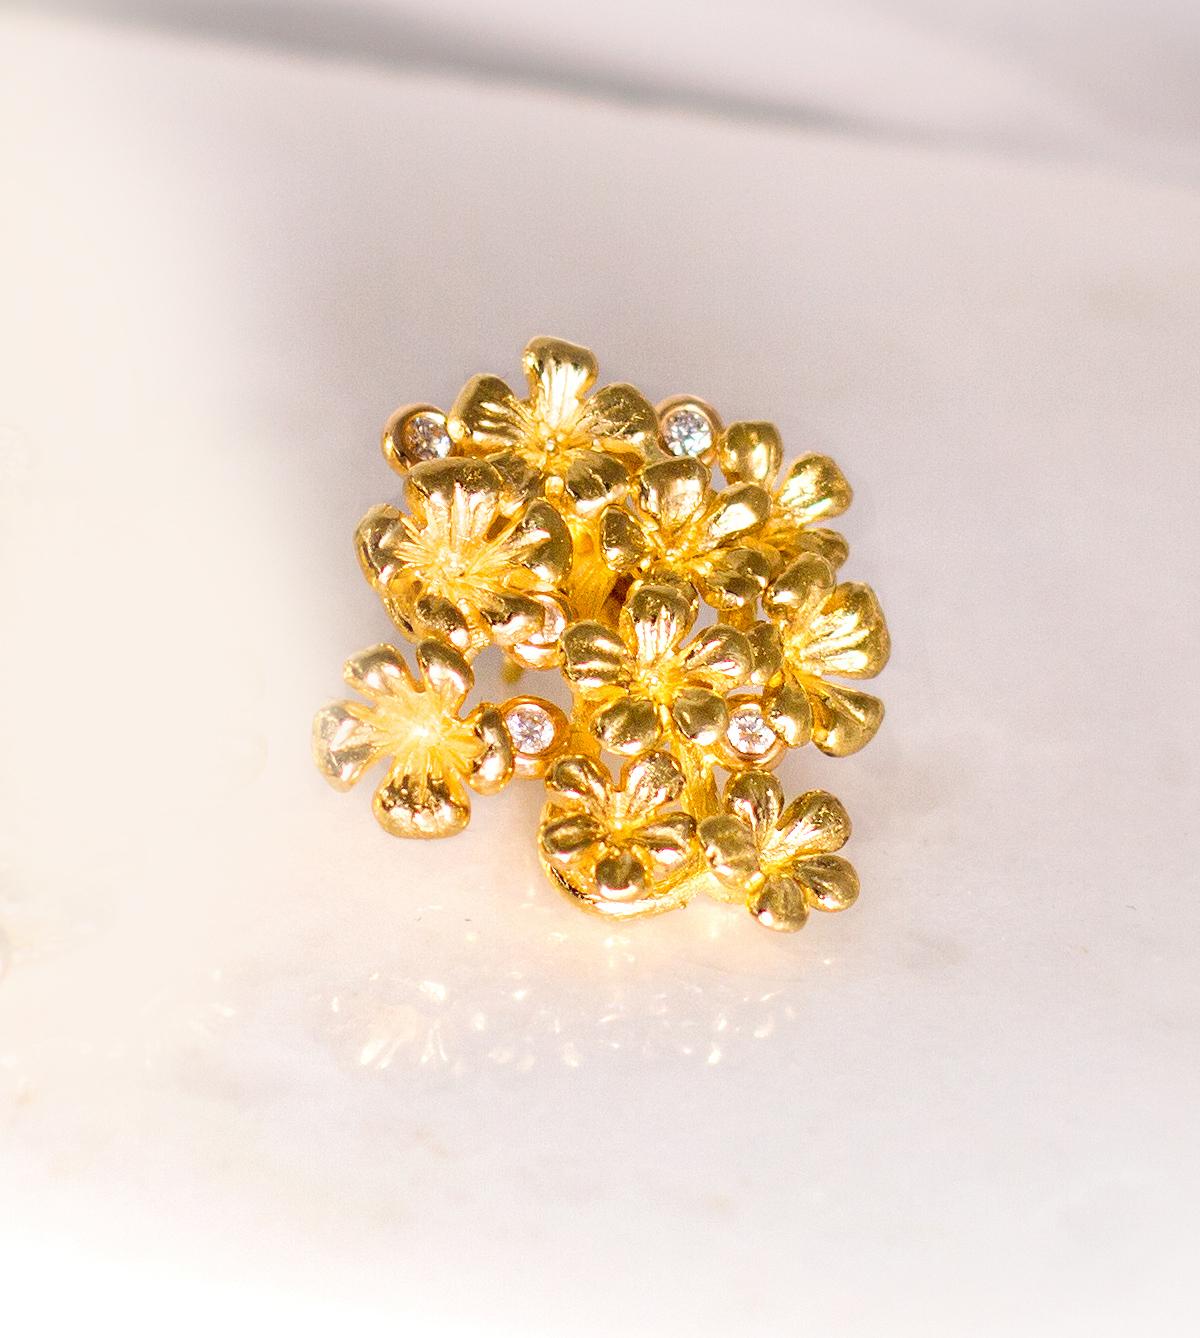 This Plum Blossom Sculptural brooch is in 18 karat yellow gold with 5 round diamonds. This collection was featured in Vogue UA review. We use top natural diamonds VS, F-G, and work with a German gems company that has been in the market since the